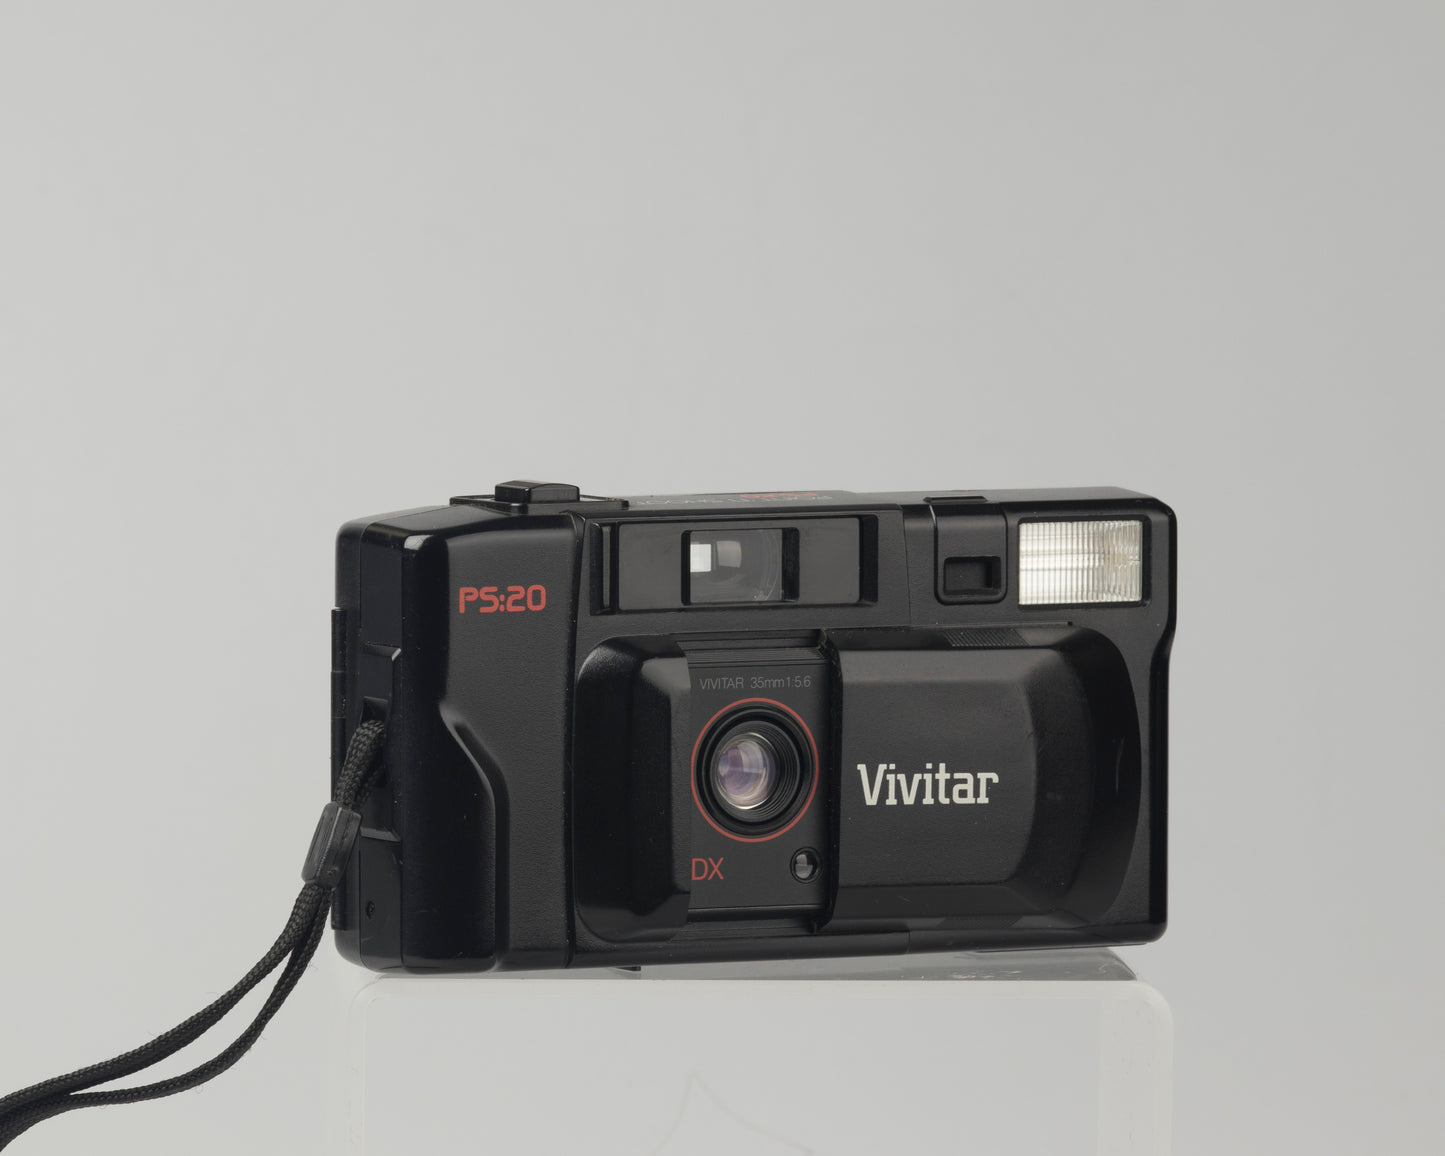 The Vivitar PS20 is a simple 35mm point-and-shoot from the 1980s. It features an autofocus 35mm f5.6 lens and DX coding for automatically setting film speed (between ISO 100 and 400)